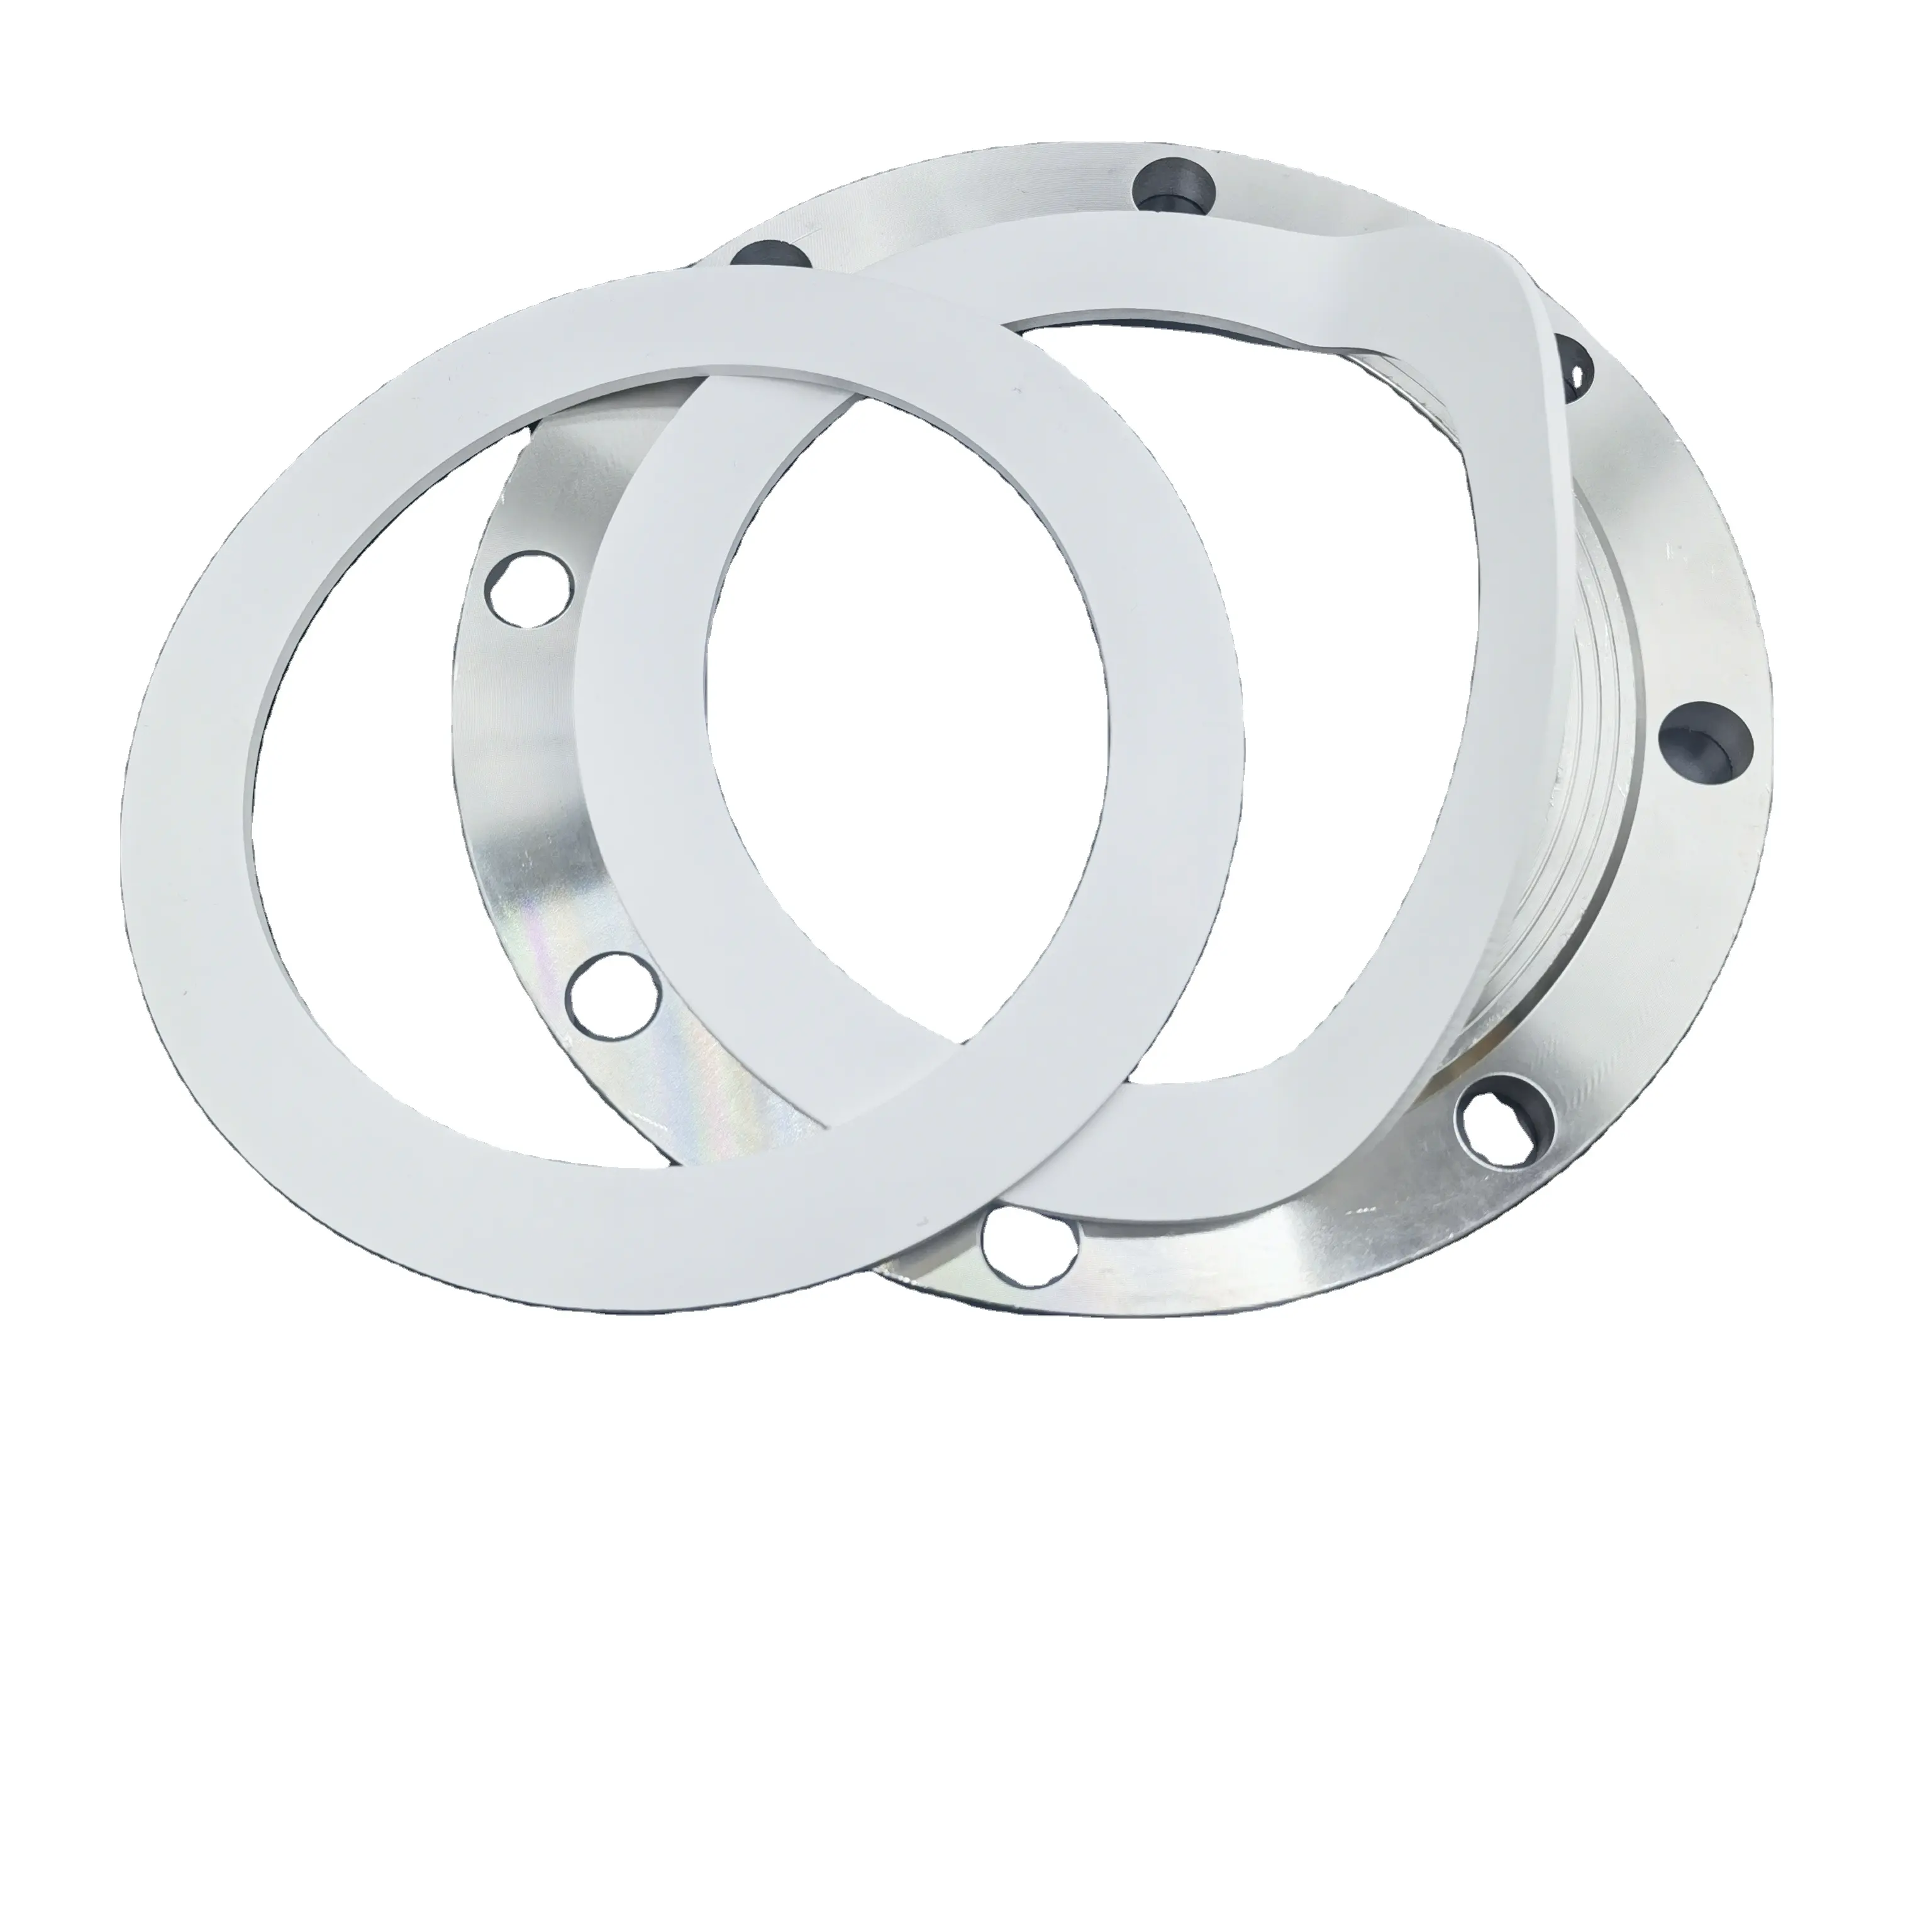 Professional Flexible and Pure ptfe gasket Manufacturer for Uneven and Damaged Flanges